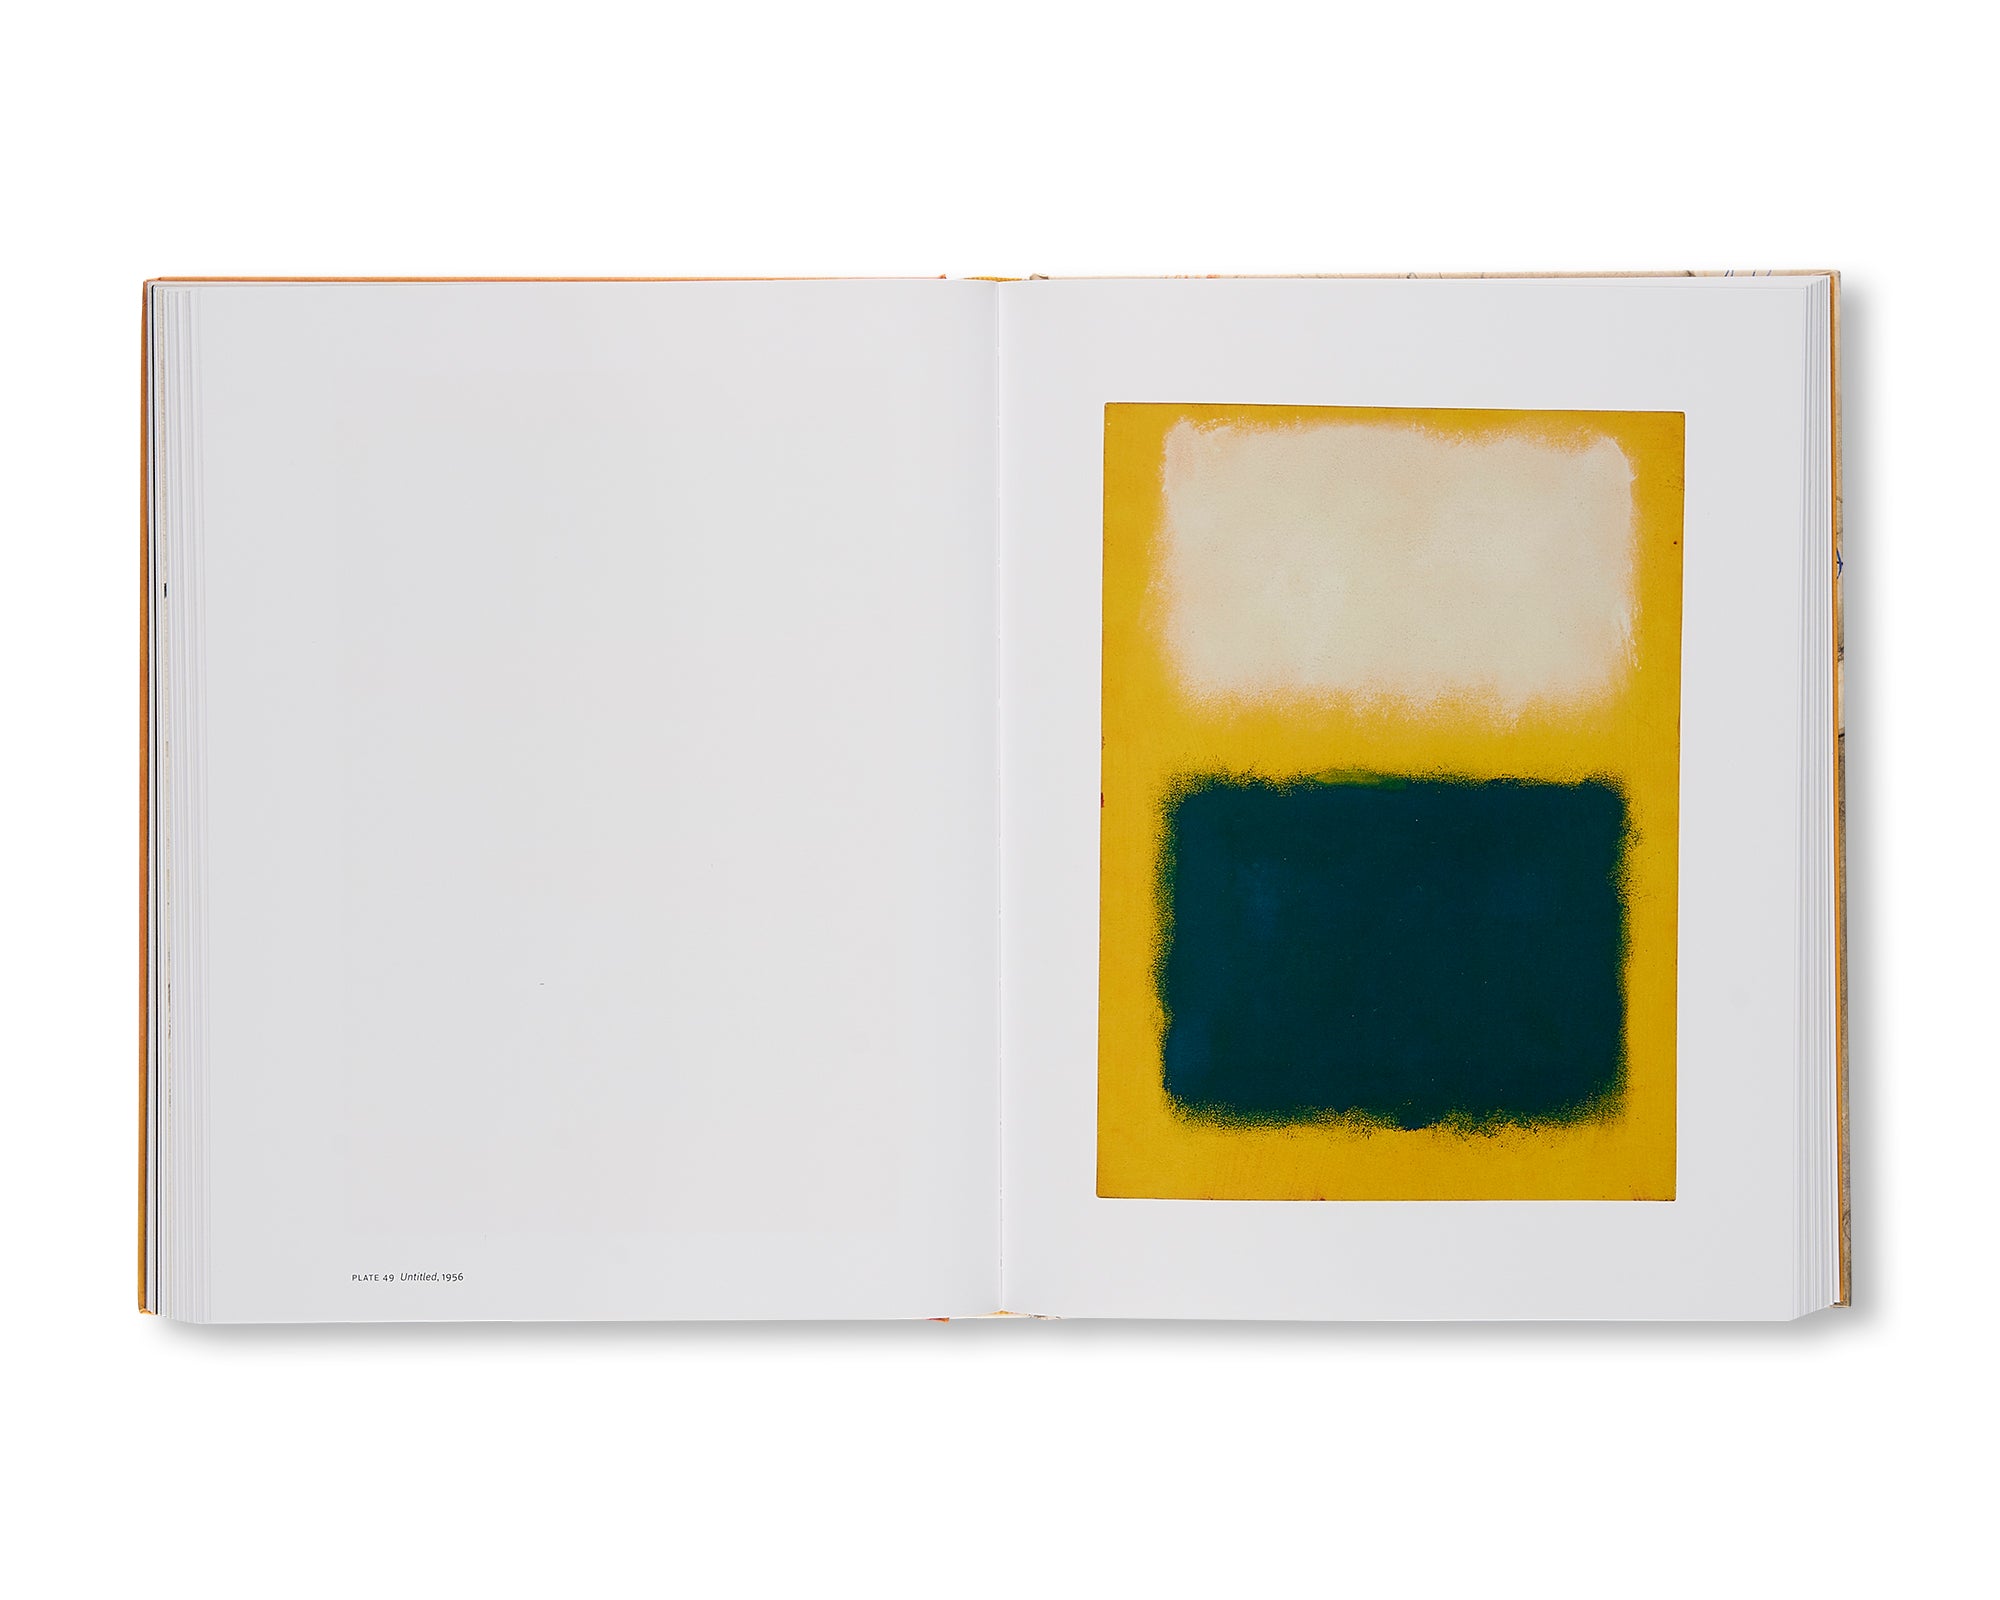 PAINTINGS ON PAPER by Mark Rothko